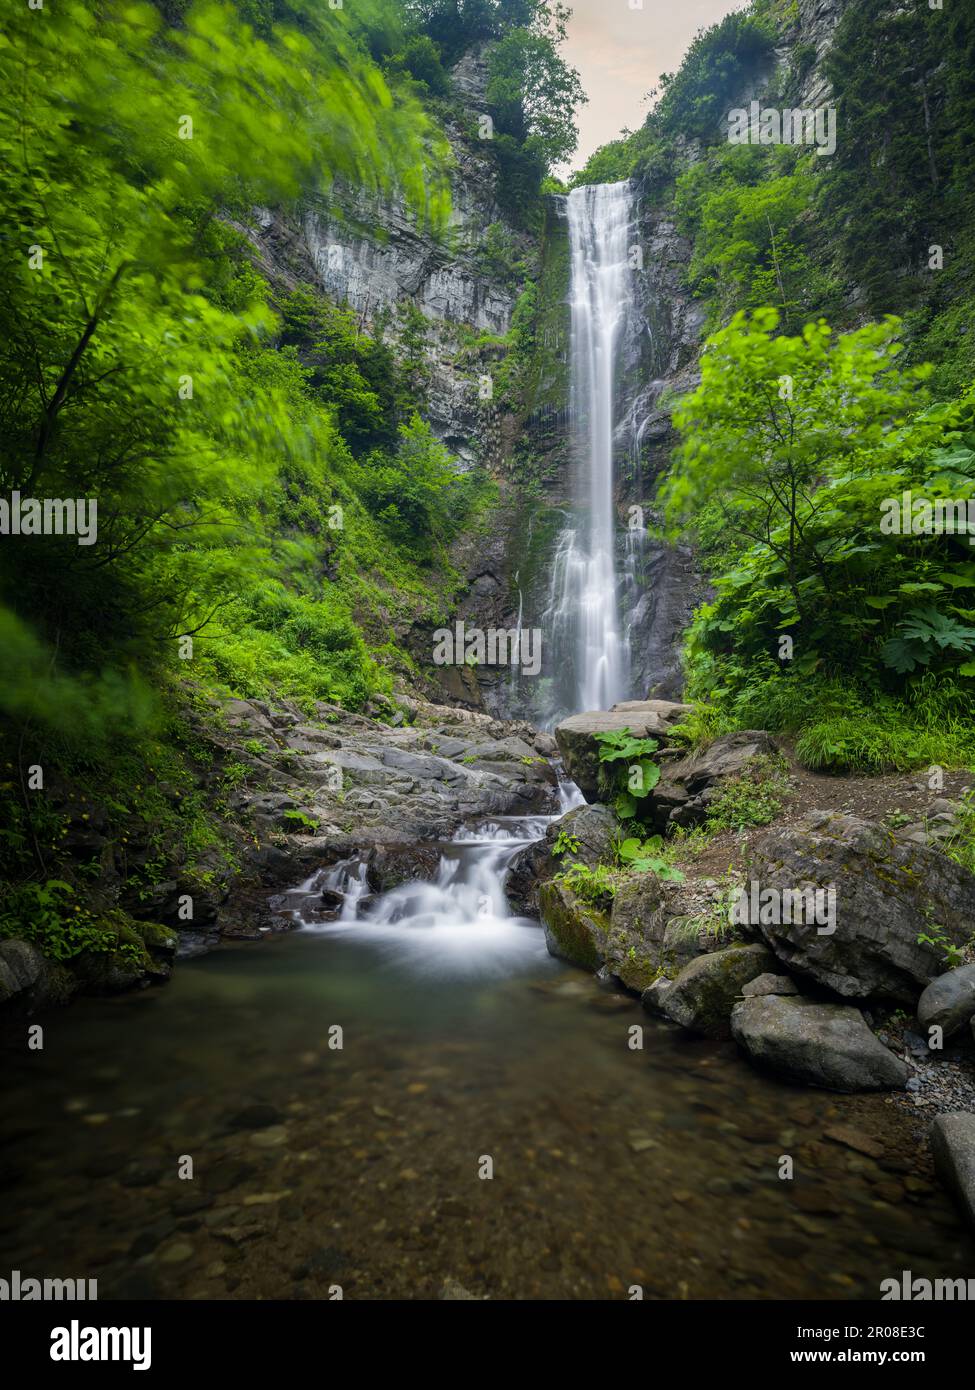 Famous Maral waterfall in Macarel valley. Karcal mountains. UNESCO's 'Biosphere Reserve Area' Camili, Artvin, Turkey Stock Photo